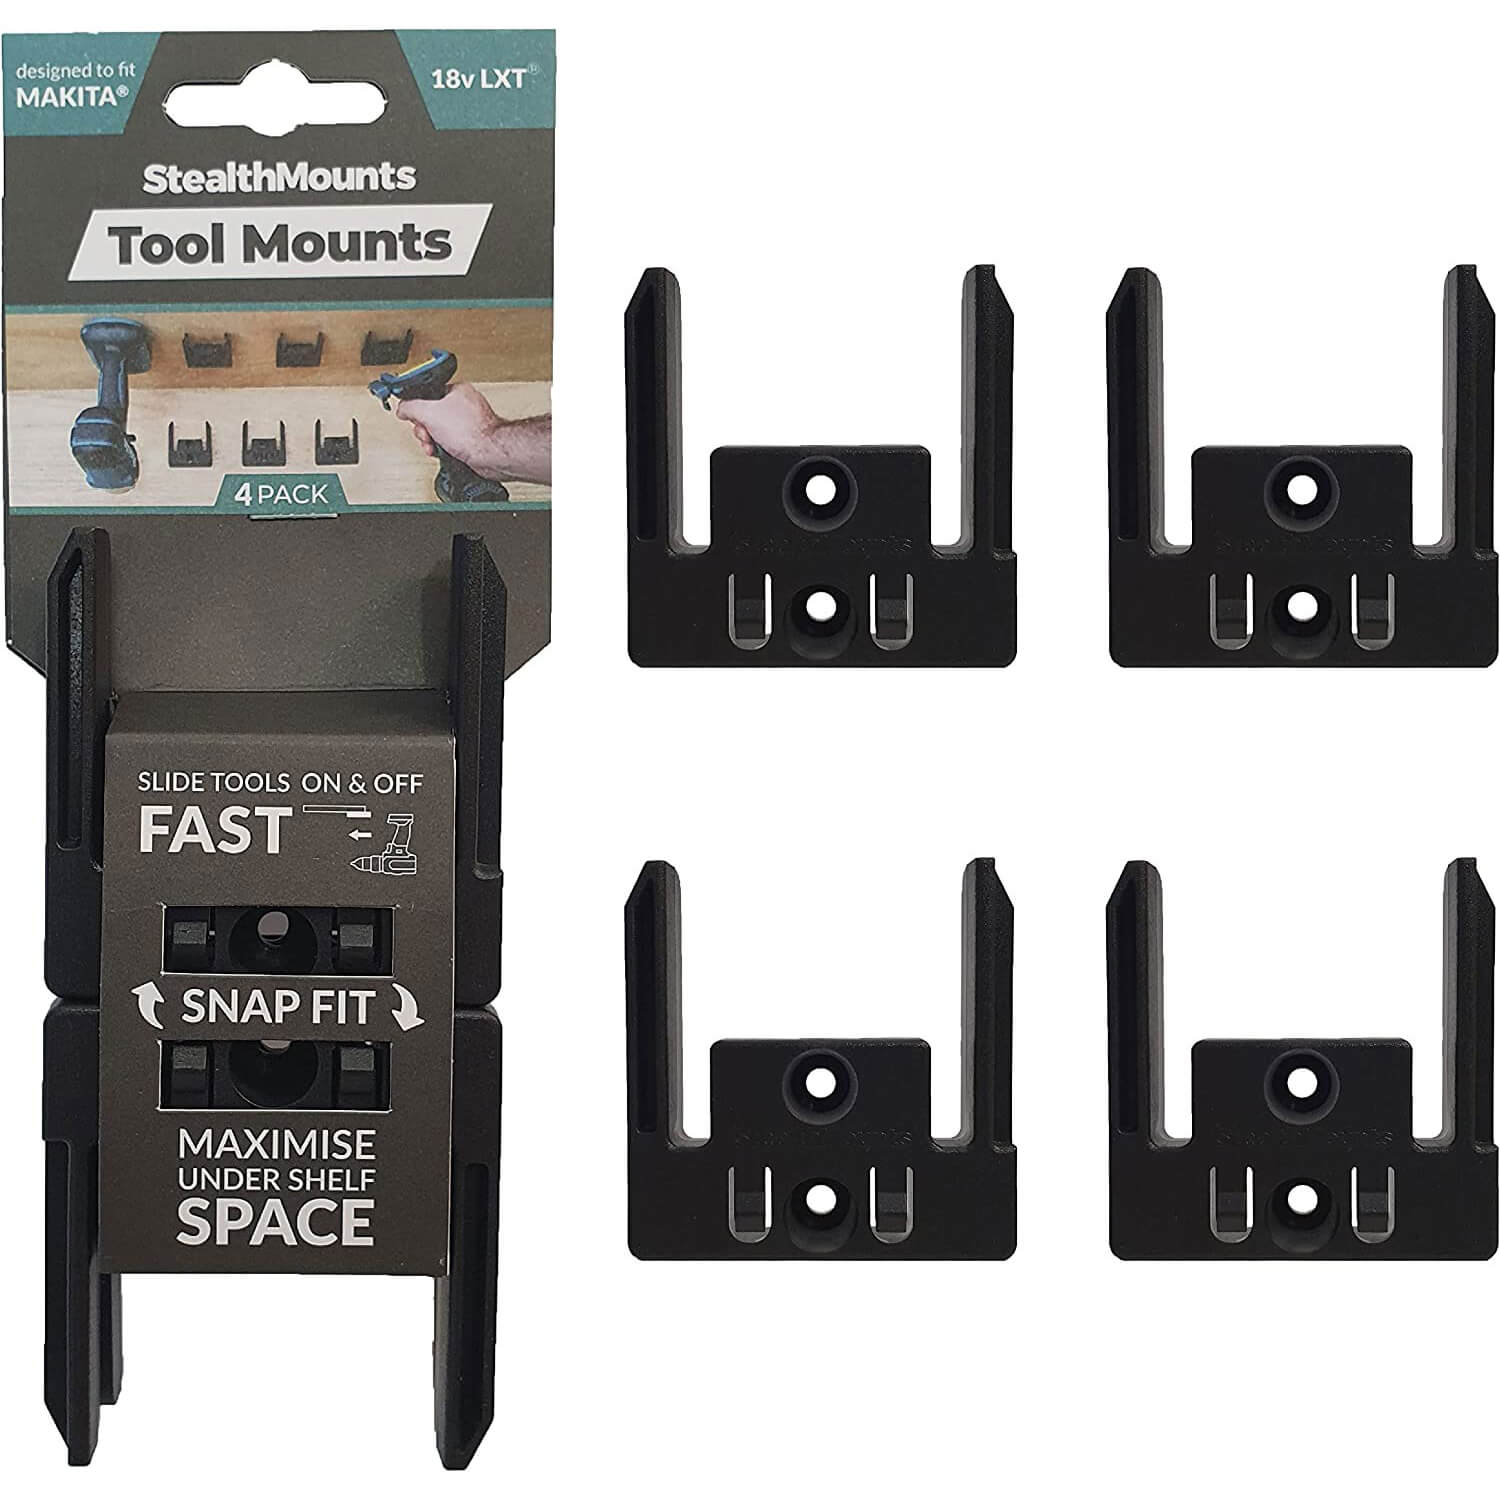 Stealth Mounts 4 Pack Tool Mounts for Makita 18V LXT Tools Black